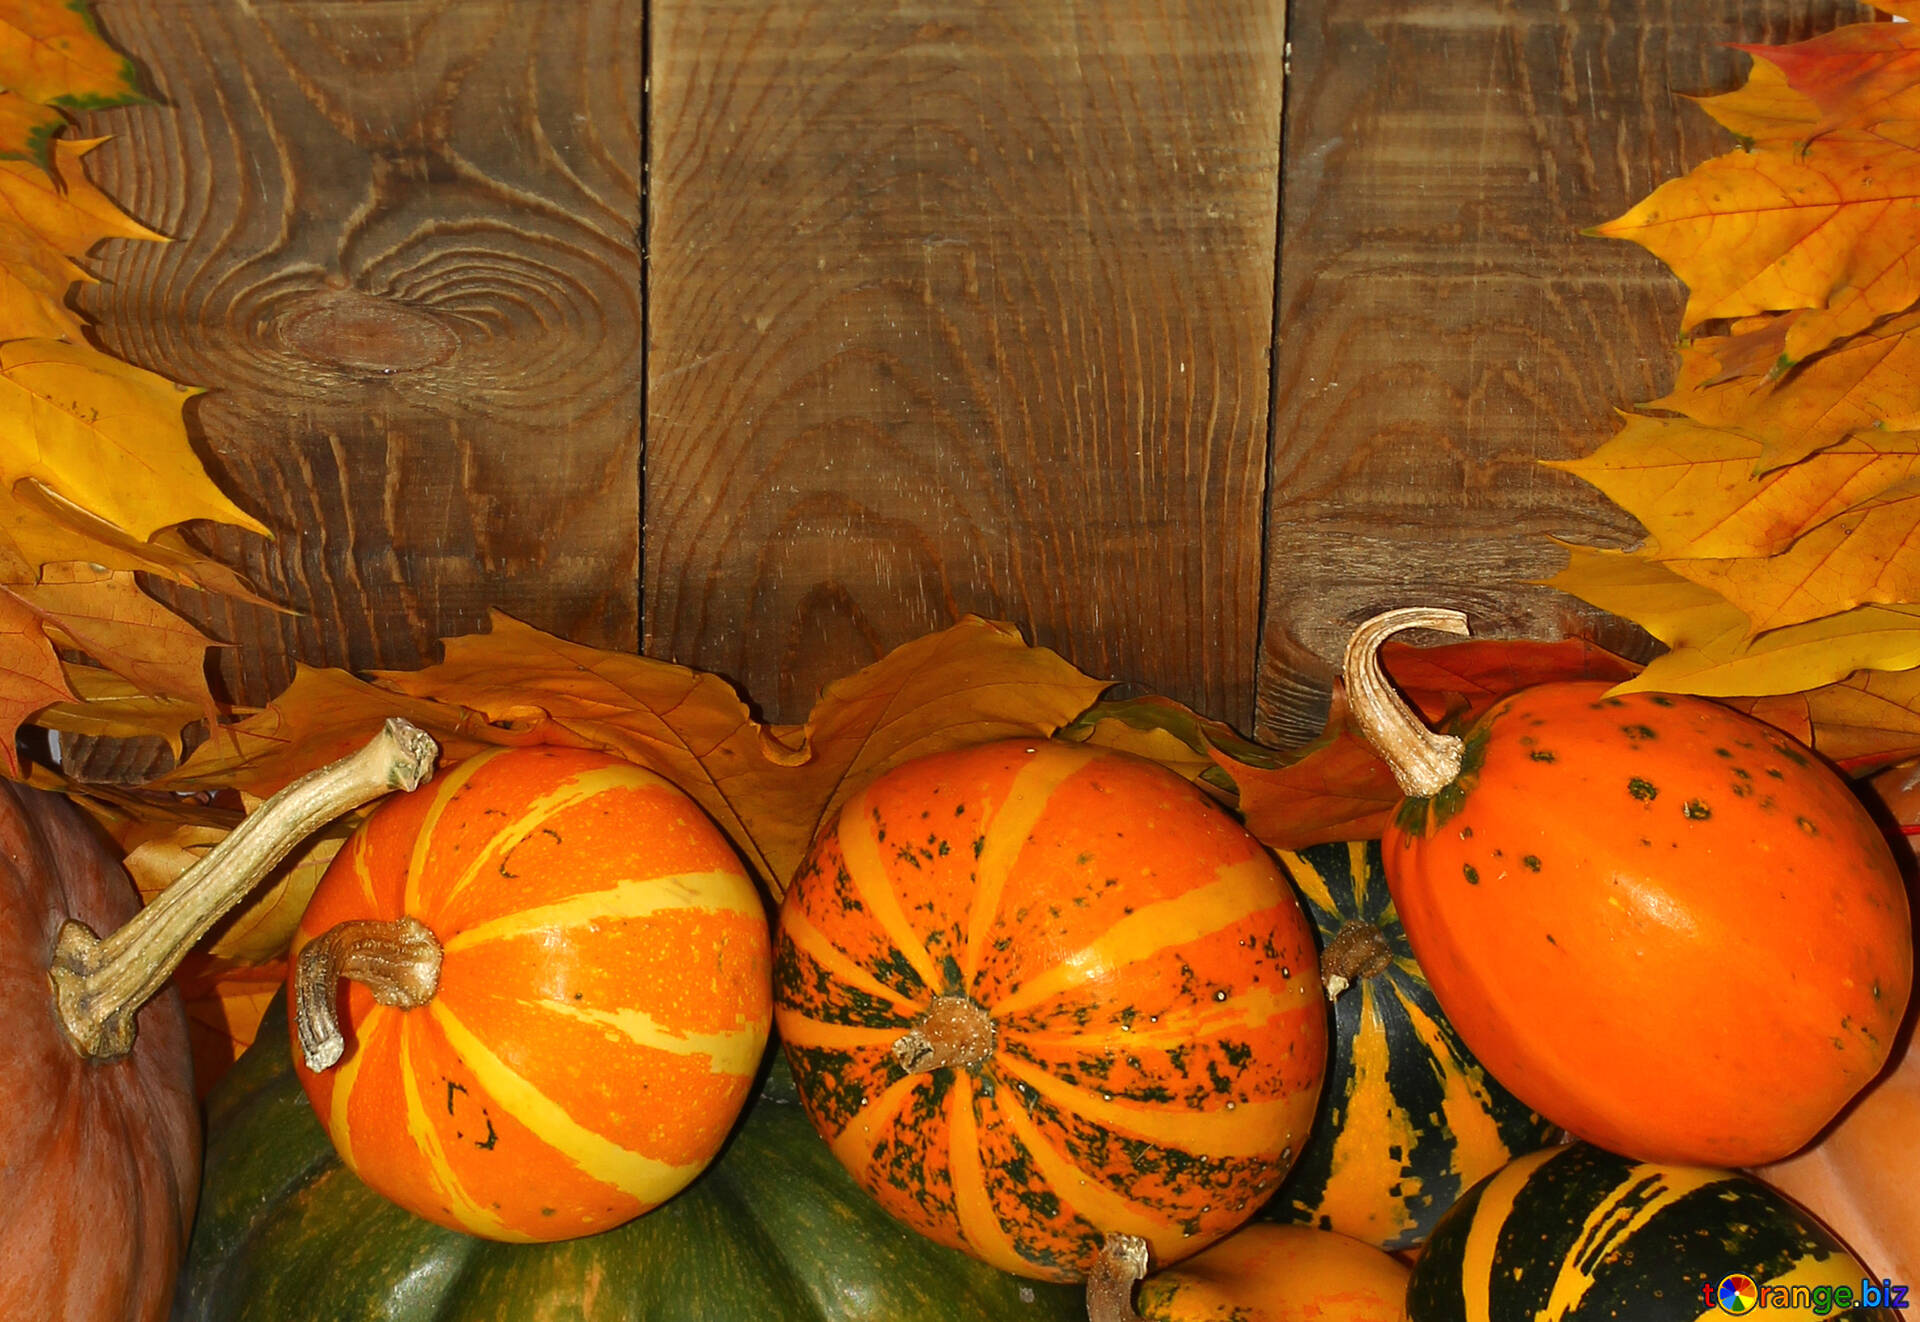 Autumn Background With Pumpkins And Leaves Image Autumn Background With Pumpkins Images Pumpkin 35234 Torange Biz Free Pics On Cc By License